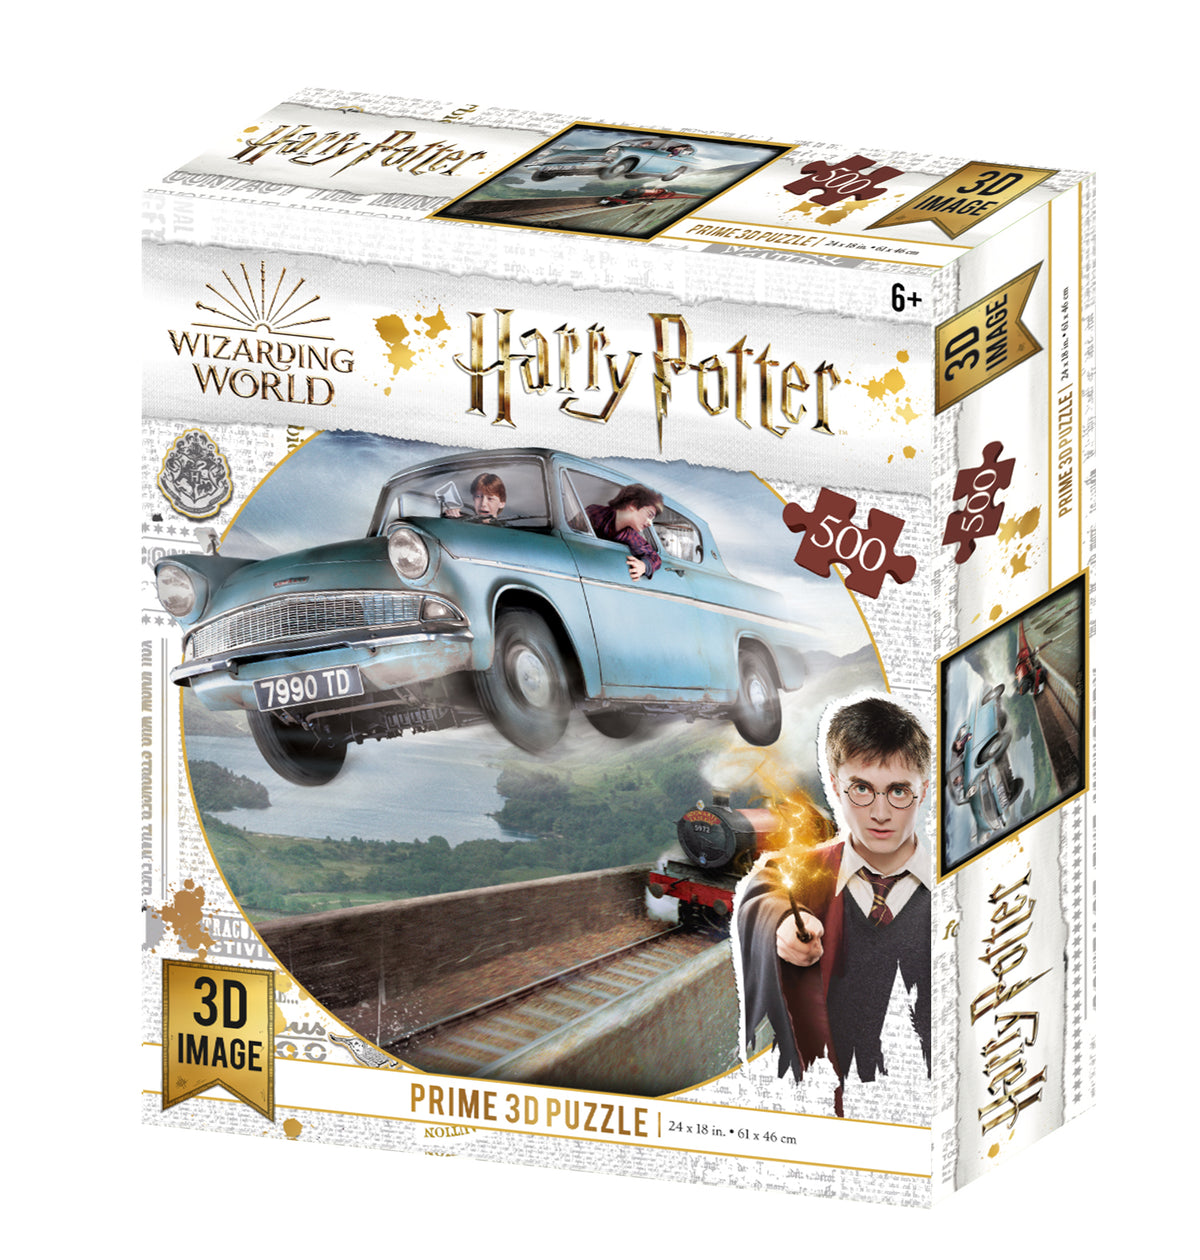 32512 | Ford Anglia Harry Potter 3D Jigsaw Puzzle 32512 500pc 24x18"